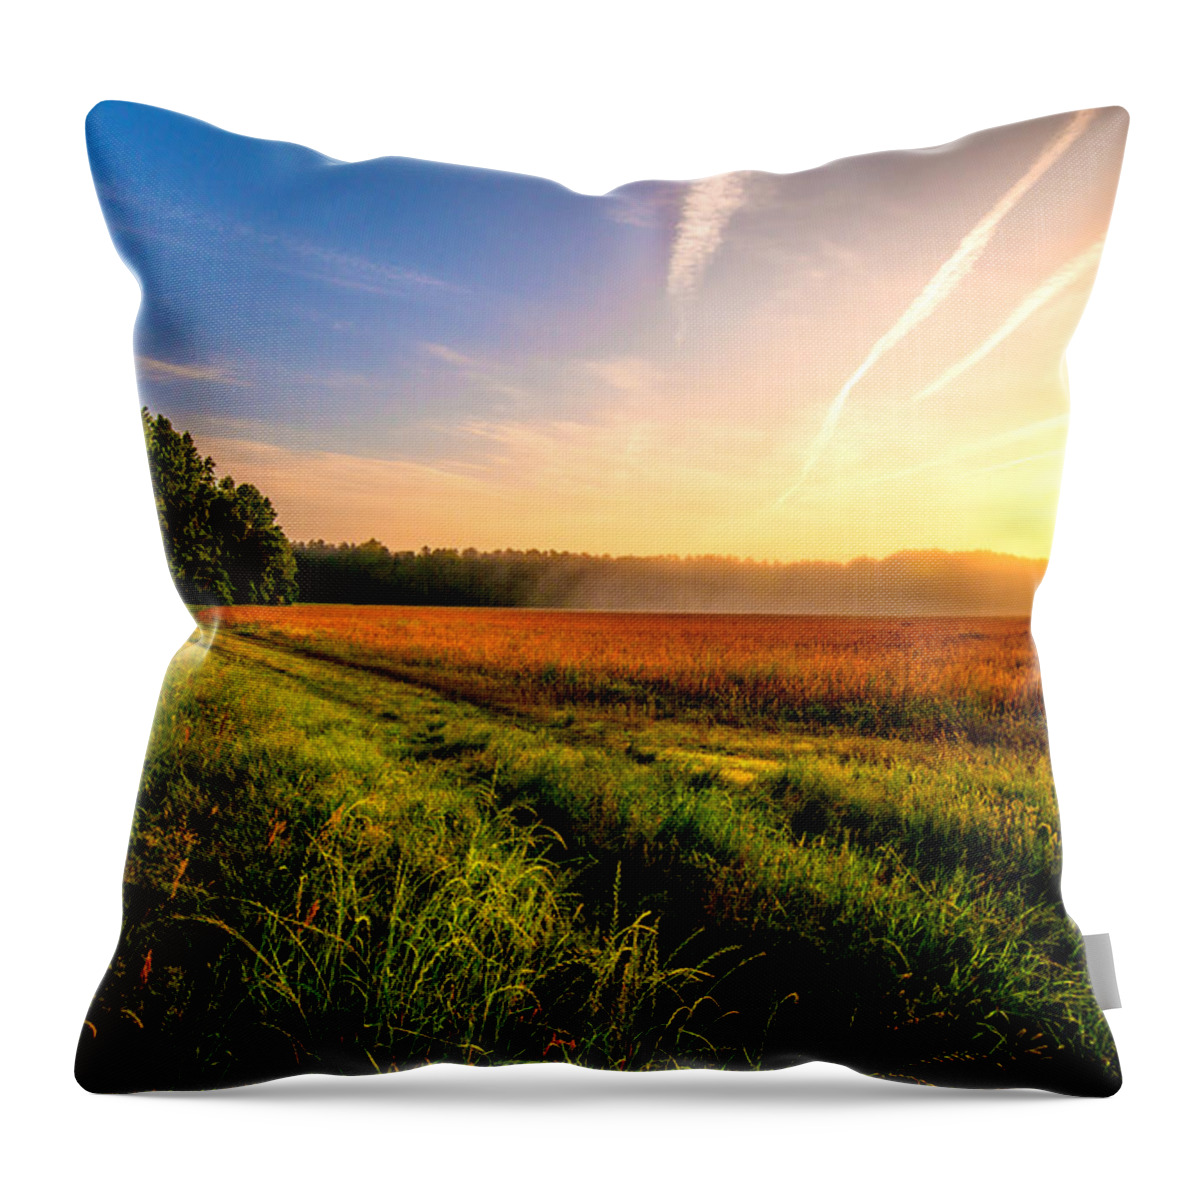 The Long Way Home Prints Throw Pillow featuring the photograph The Long Way Home by John Harding